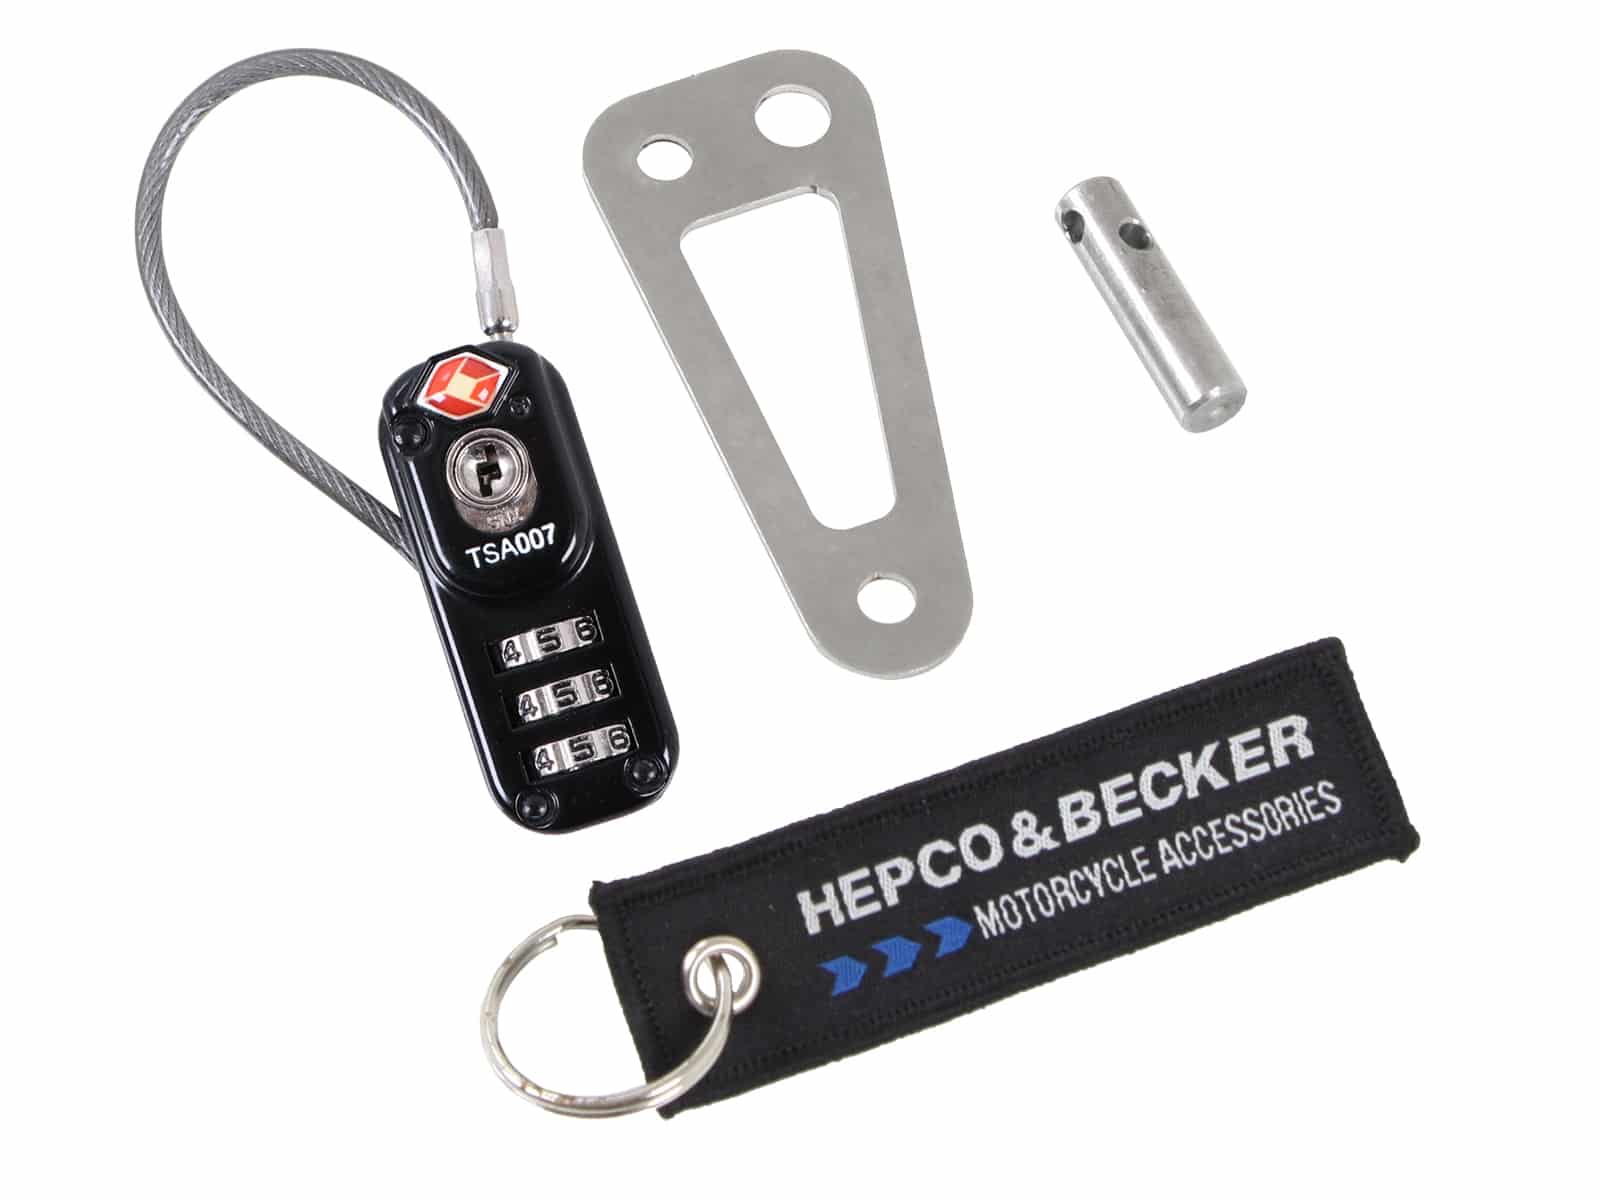 Anti-theft device for tank bags and rear bags Lock-it and Basic by Hepco&Becker